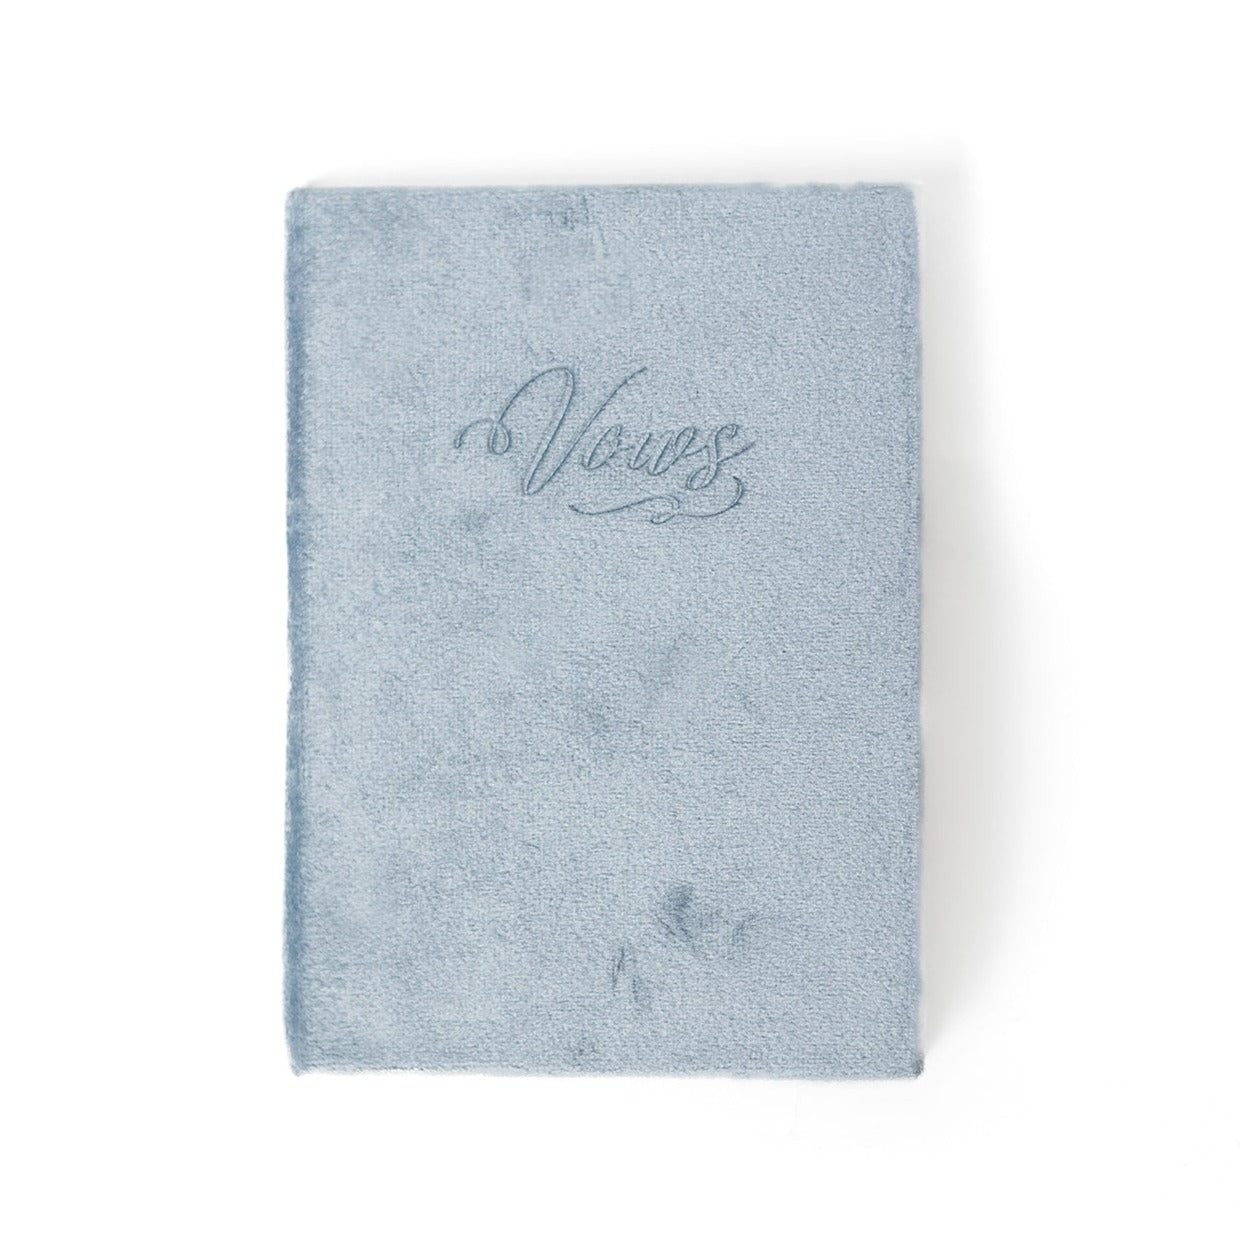 A powder blue vow book with the word "Vows" embossed on the front cover.